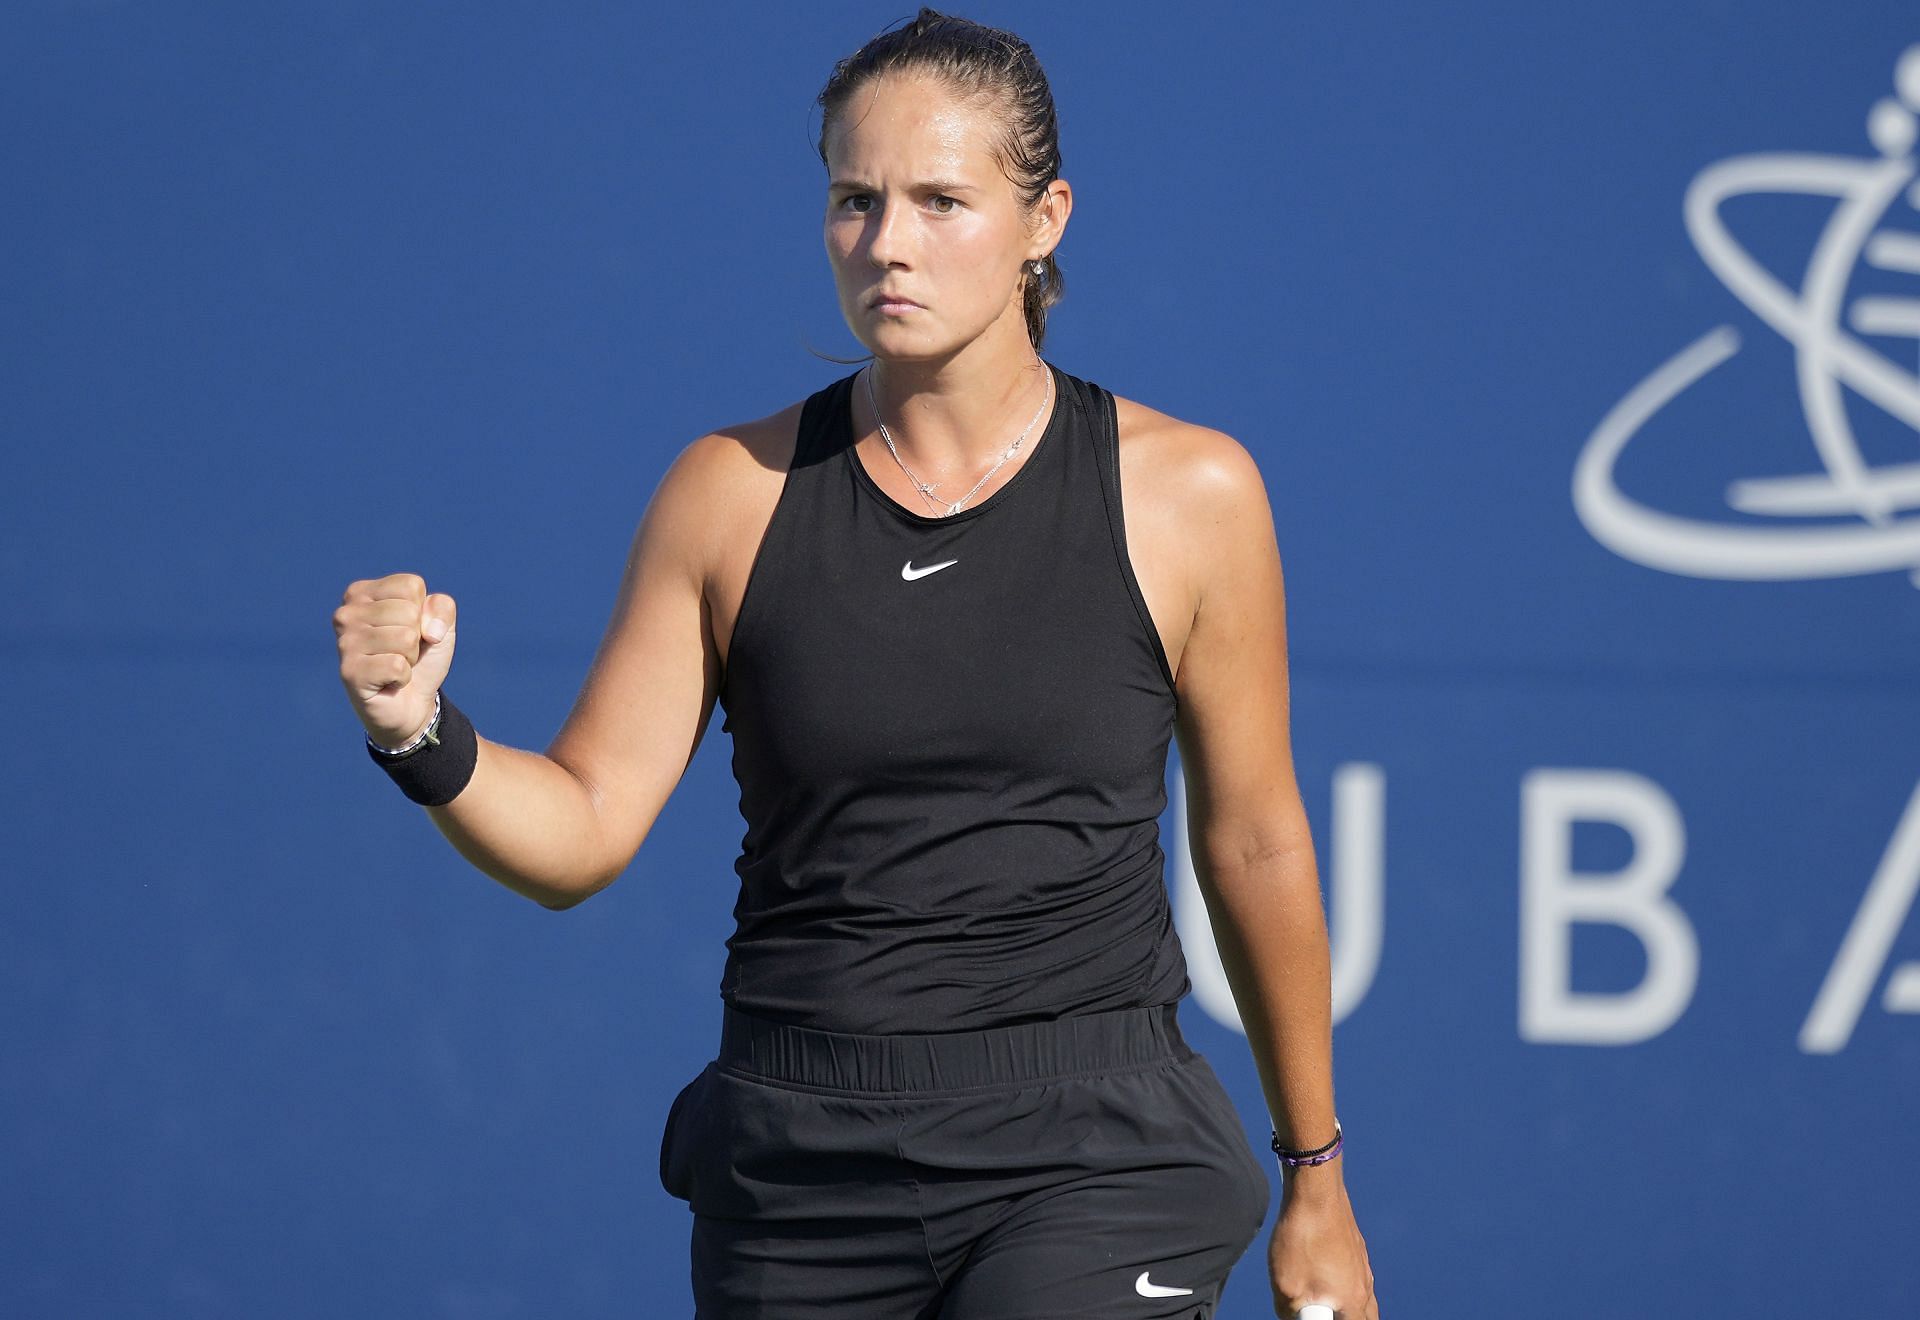 Daria Kasatkina will look to extend her good form from 2021 in the Melbourne Summer Set.